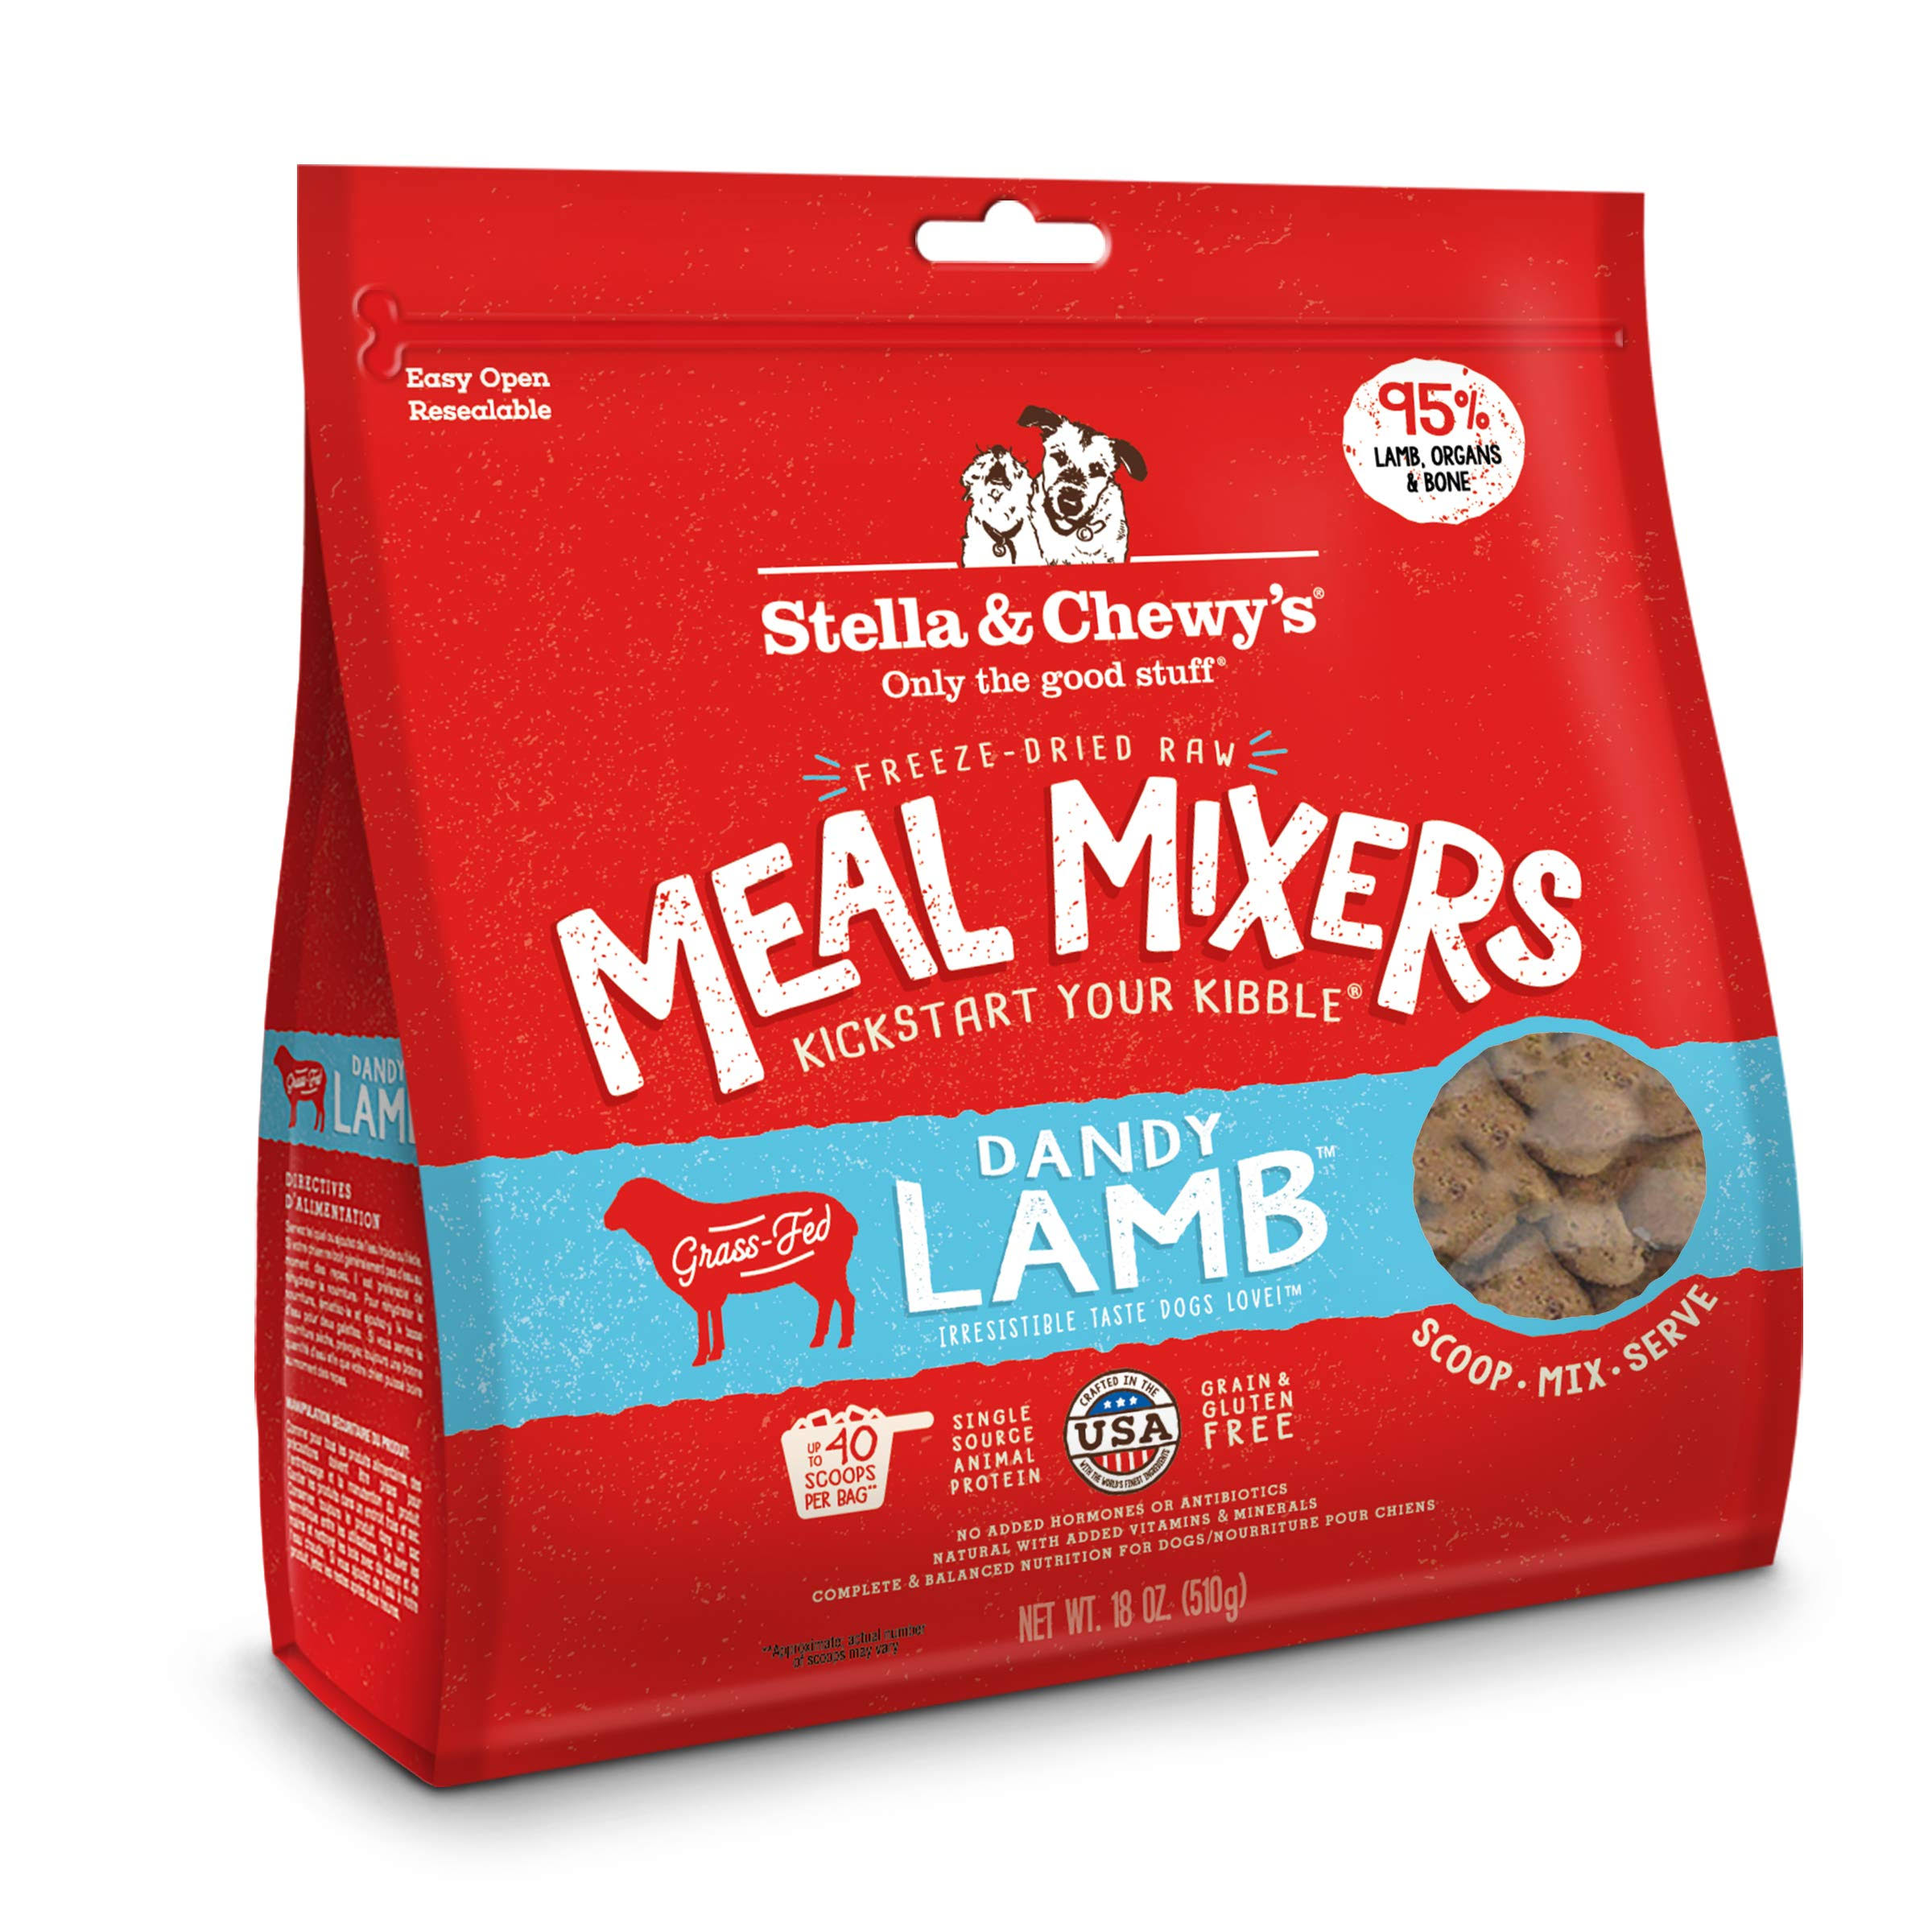 Stella & Chewy's Dandy Lamb Meal Mixers Dog Food Topper - 18 oz.